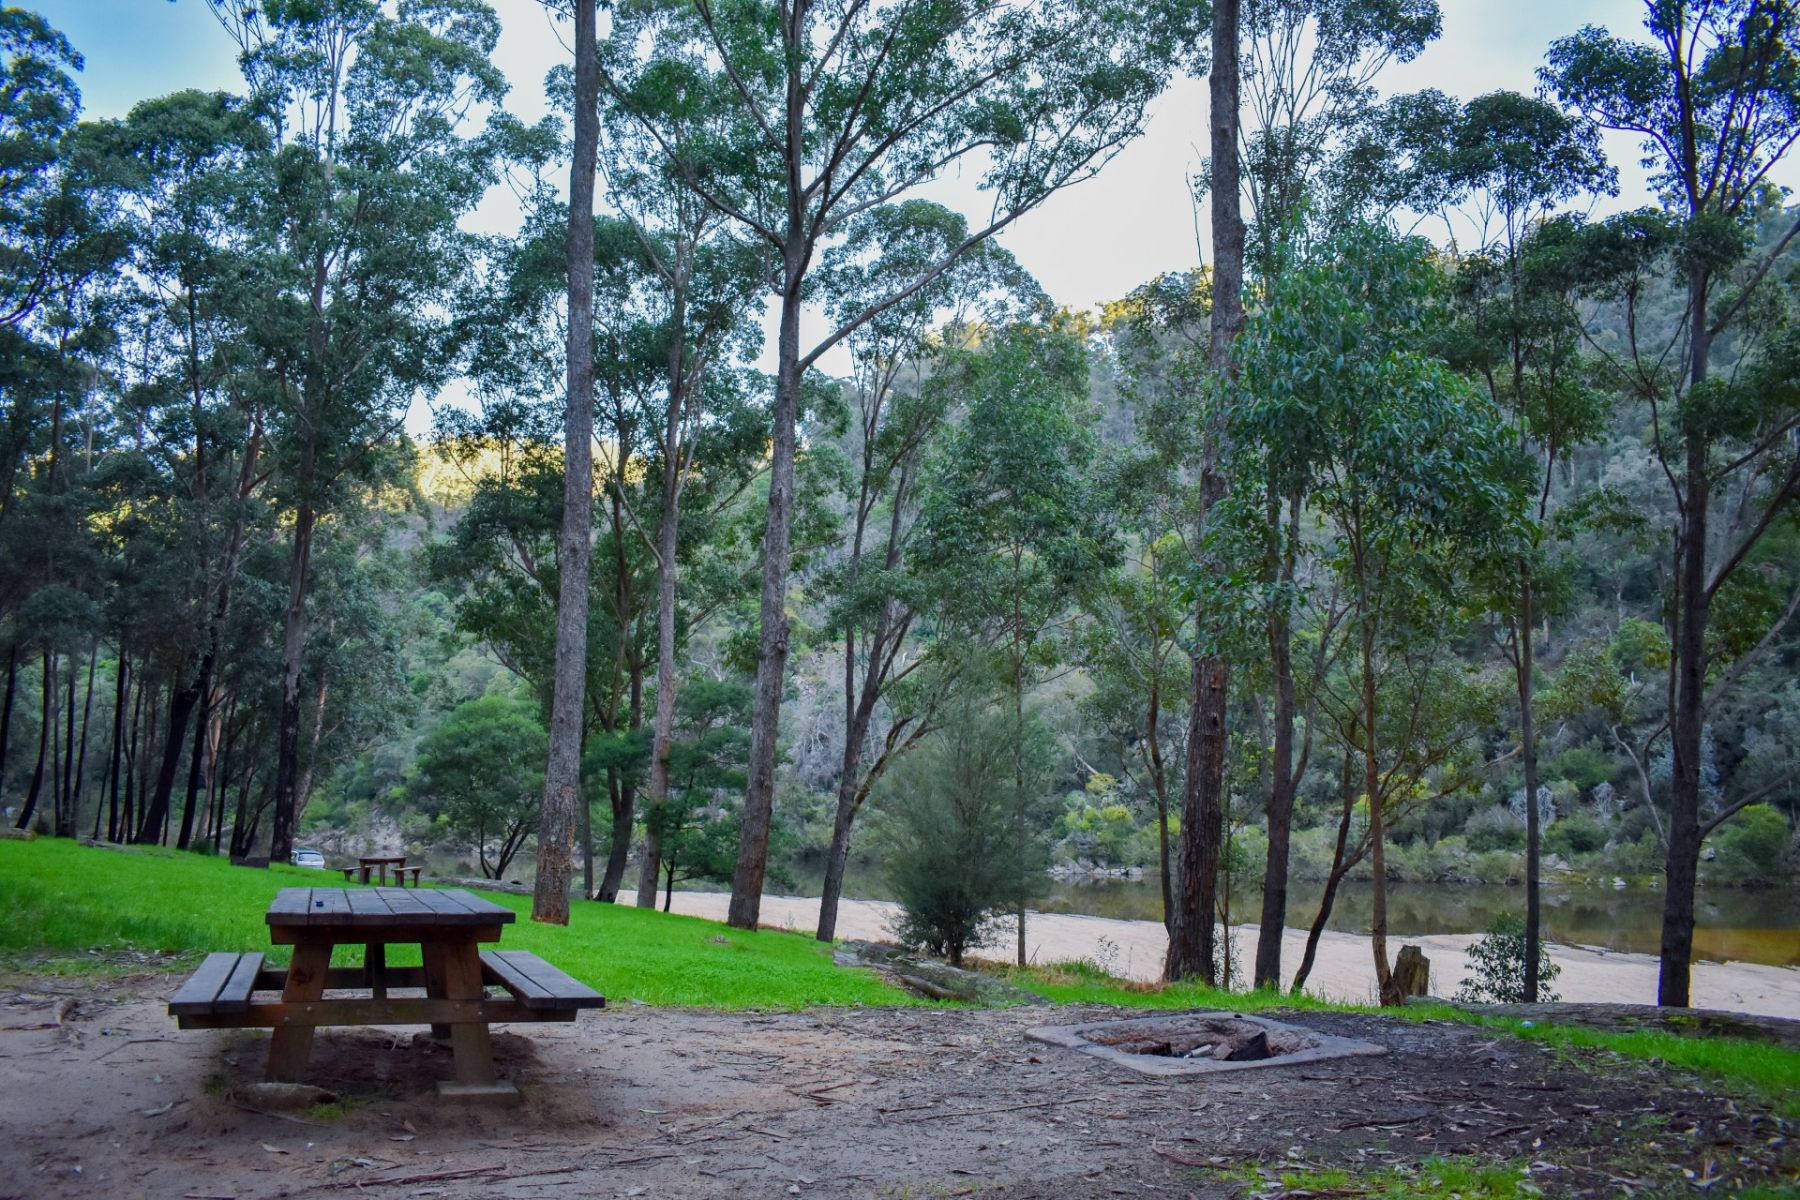 A wooden picnic table overlooking a river in the forest